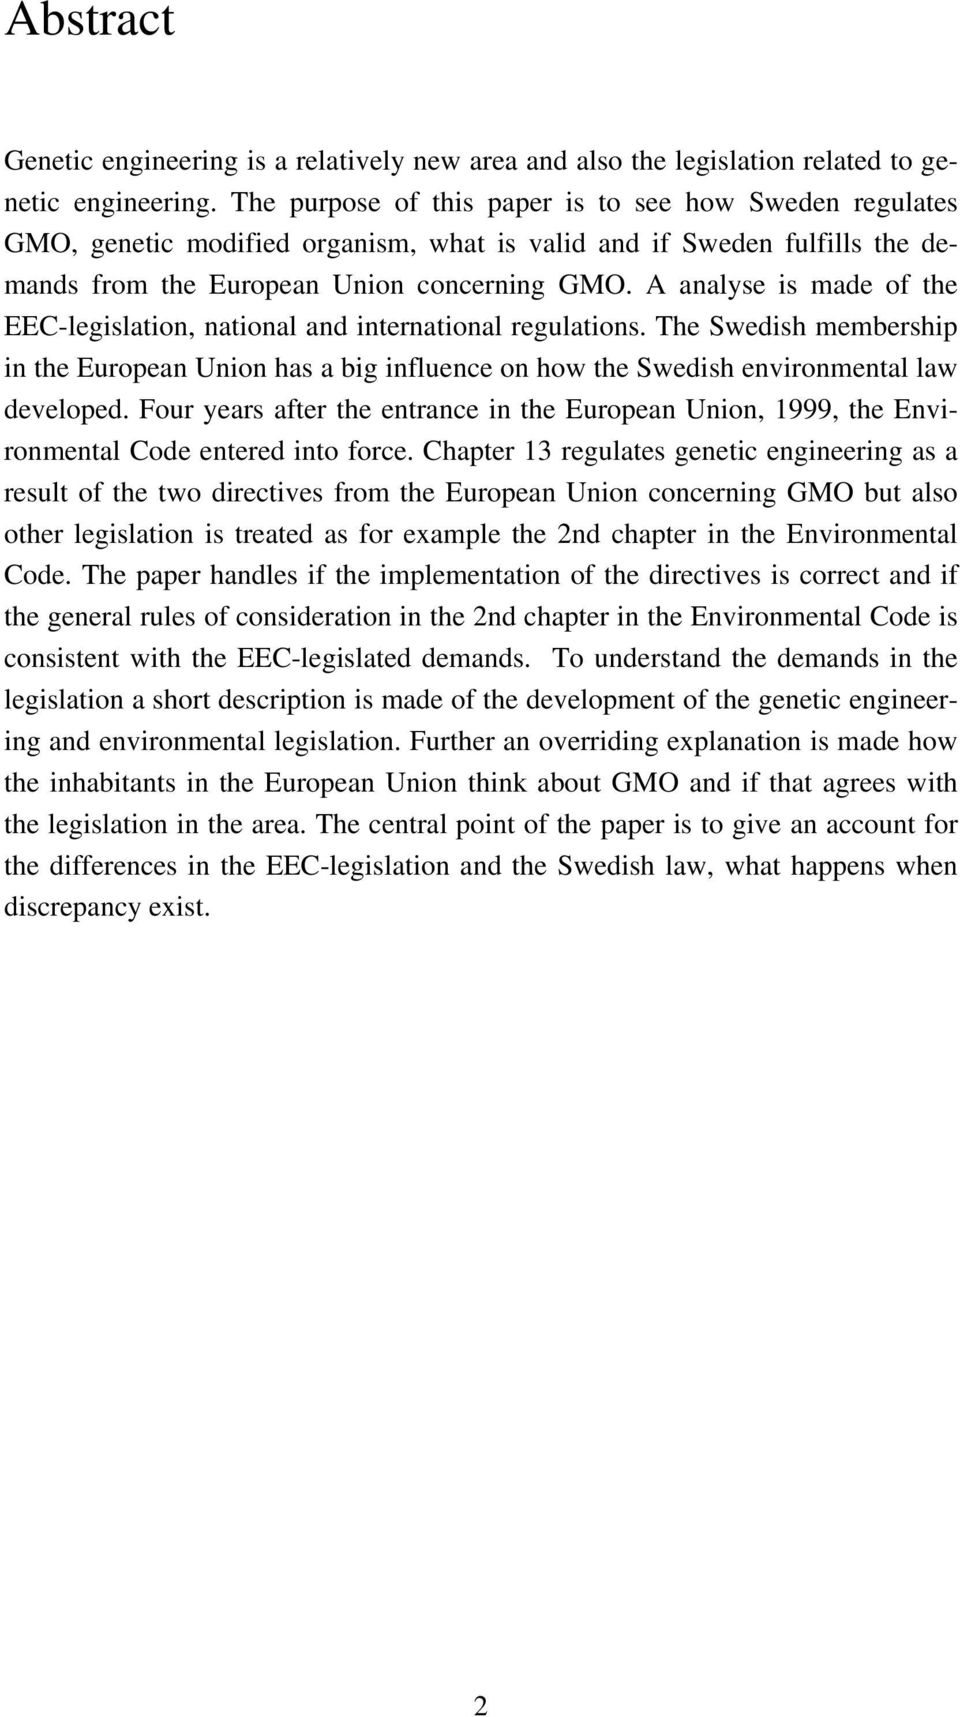 A analyse is made of the EEC-legislation, national and international regulations. The Swedish membership in the European Union has a big influence on how the Swedish environmental law developed.